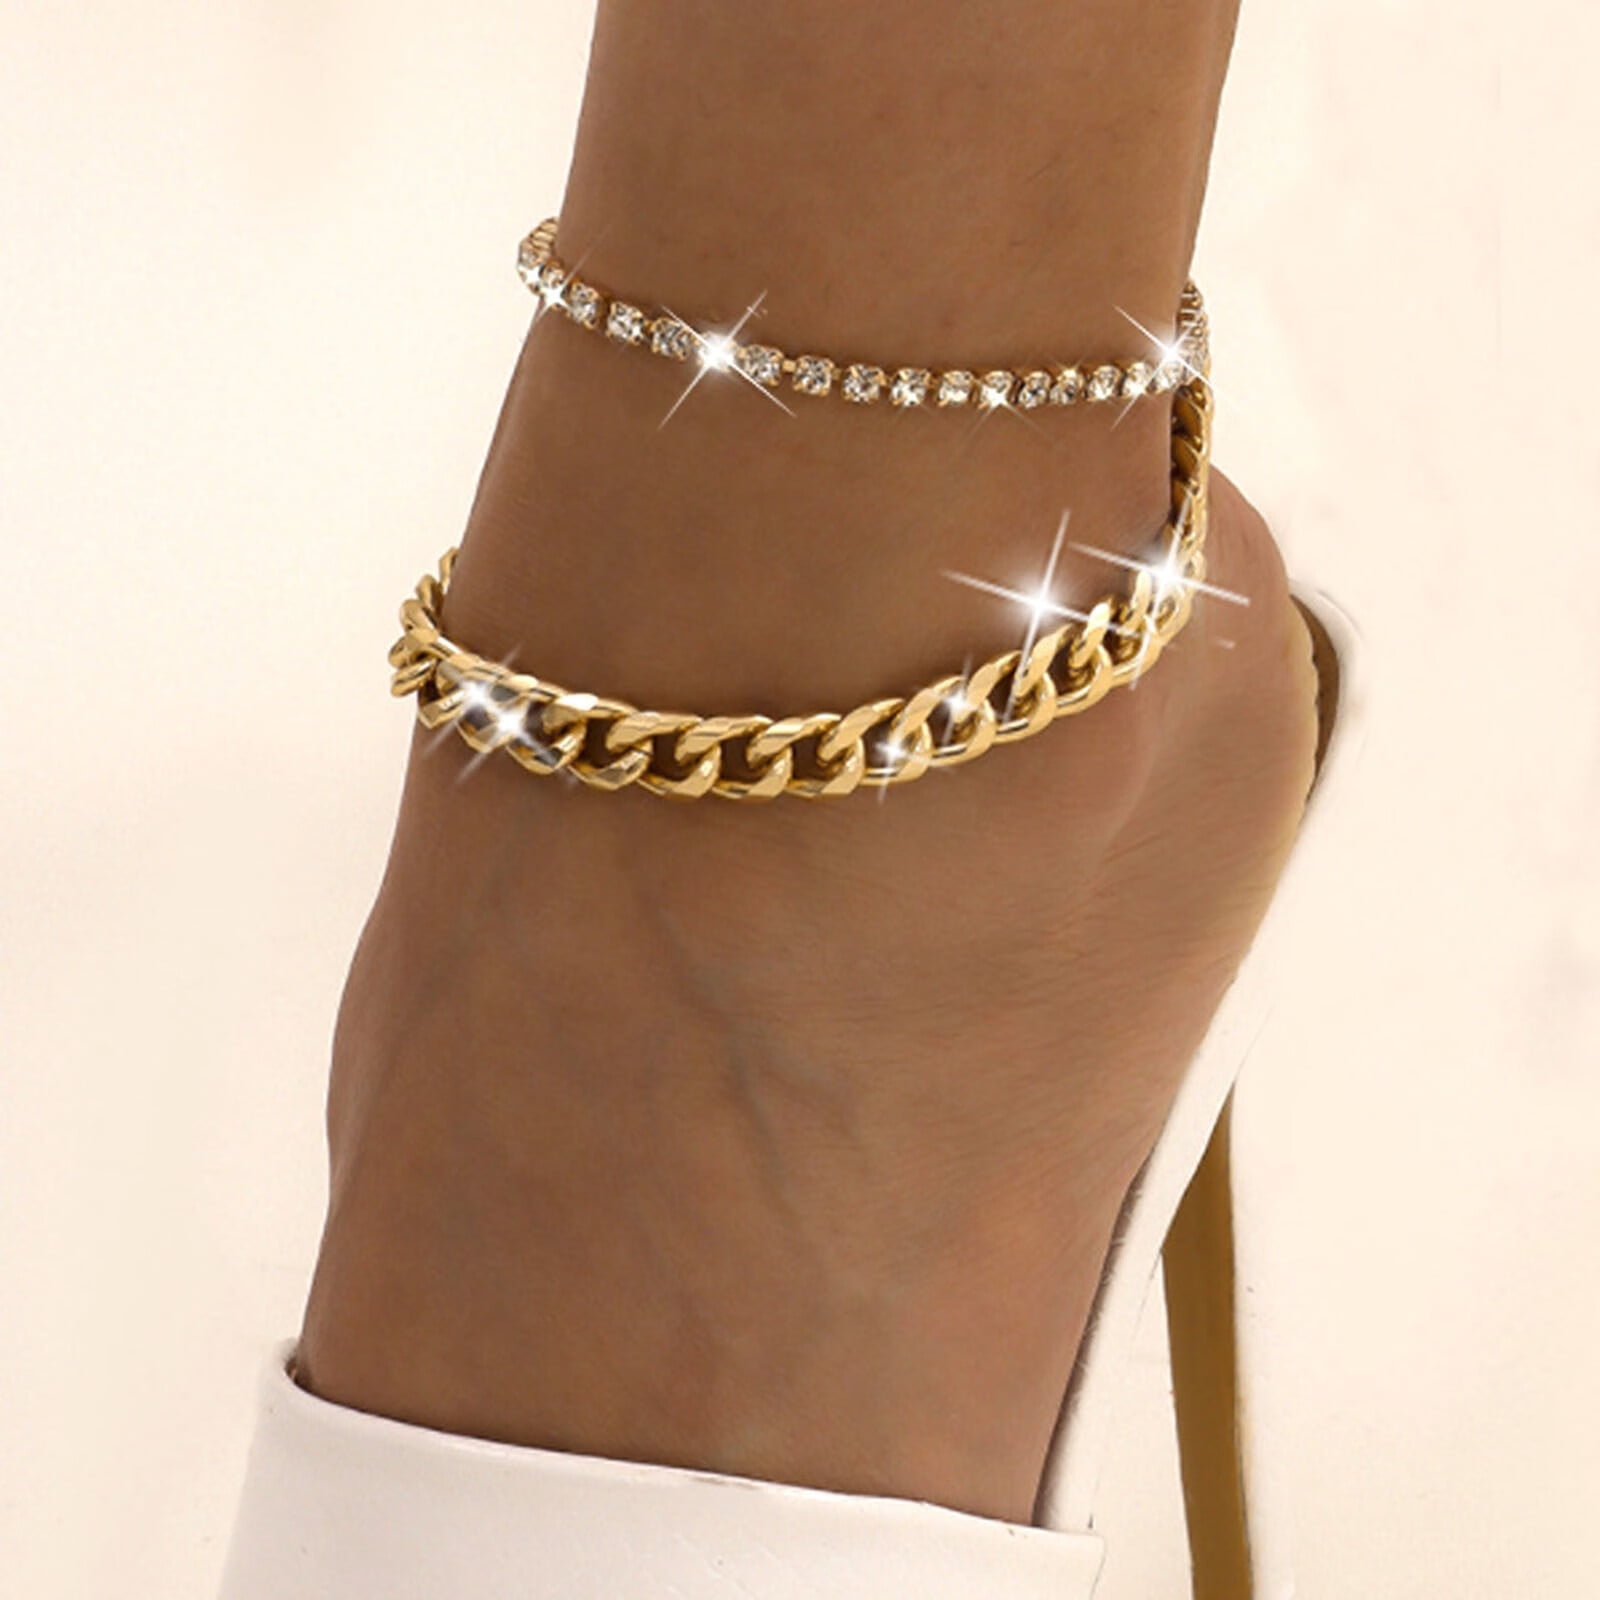 Ankle Bracelet with Name in Rose Gold Plating - MYKA